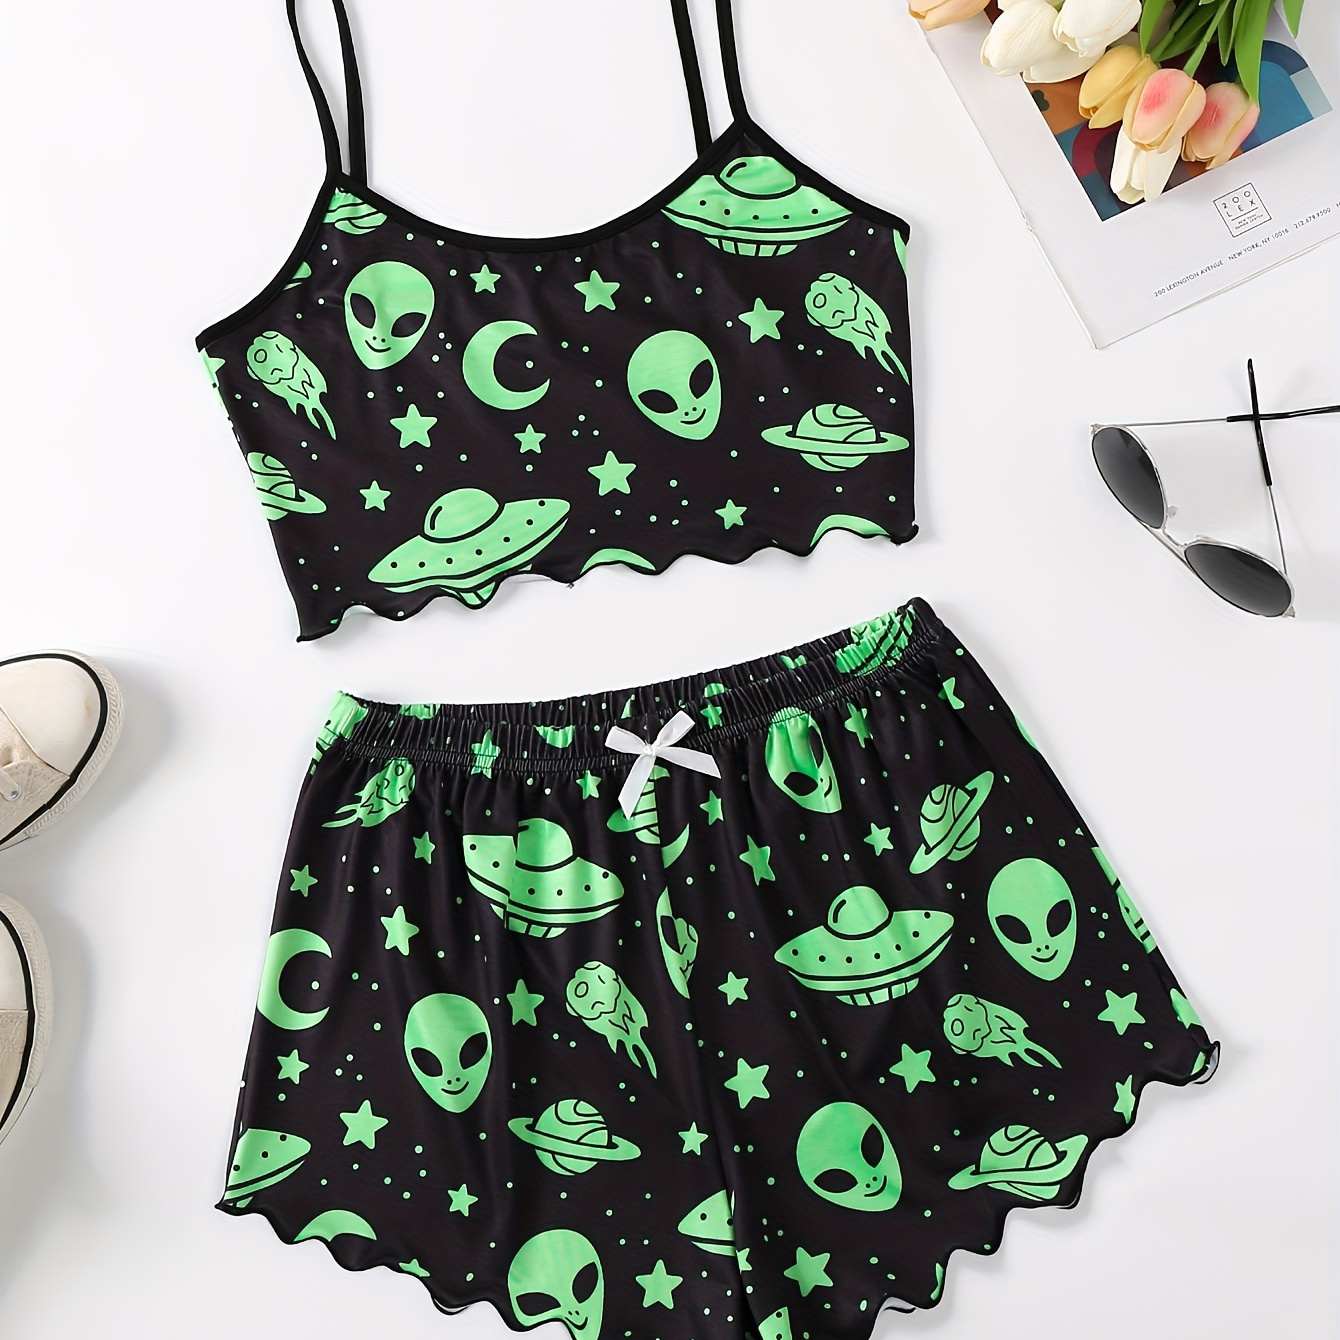 

Women's Cartoon Alien & Ufo Print Casual Frill Trim Pajama Set, Round Neck Backless Crop Cami Top & Shorts, Comfortable Relaxed Fit, Summer Nightwear